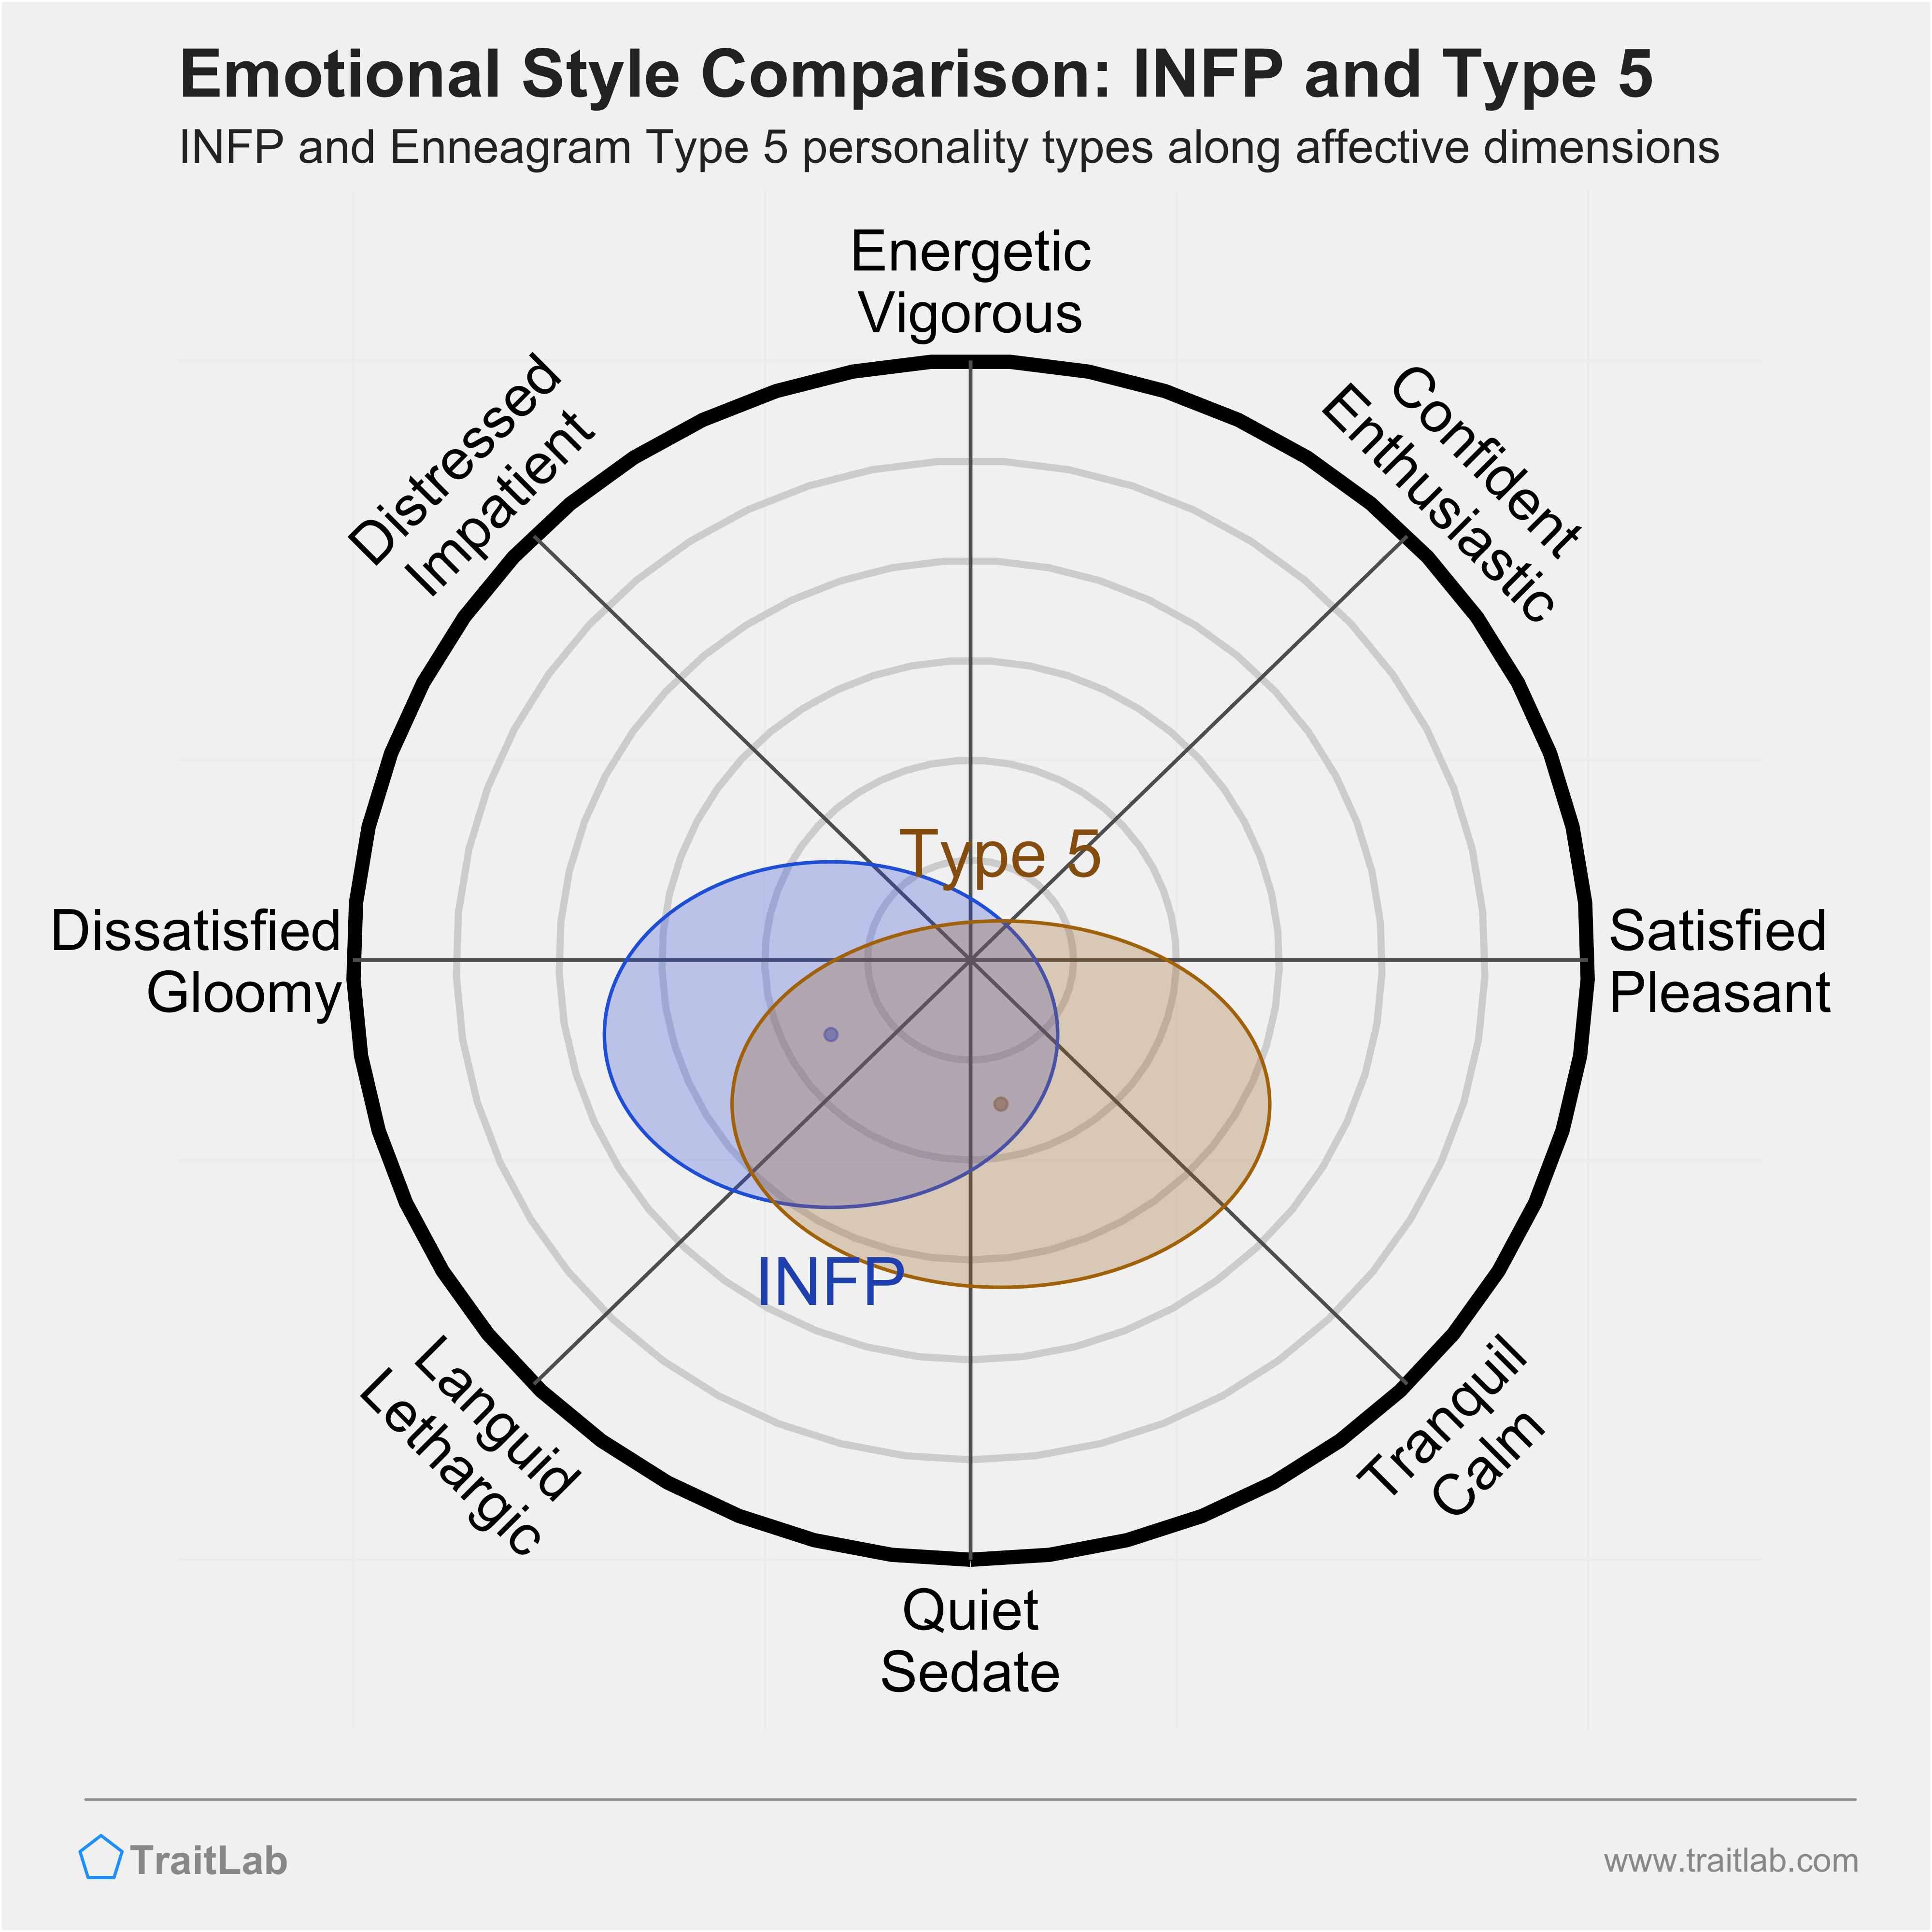 INFP and Type 5 comparison across emotional (affective) dimensions